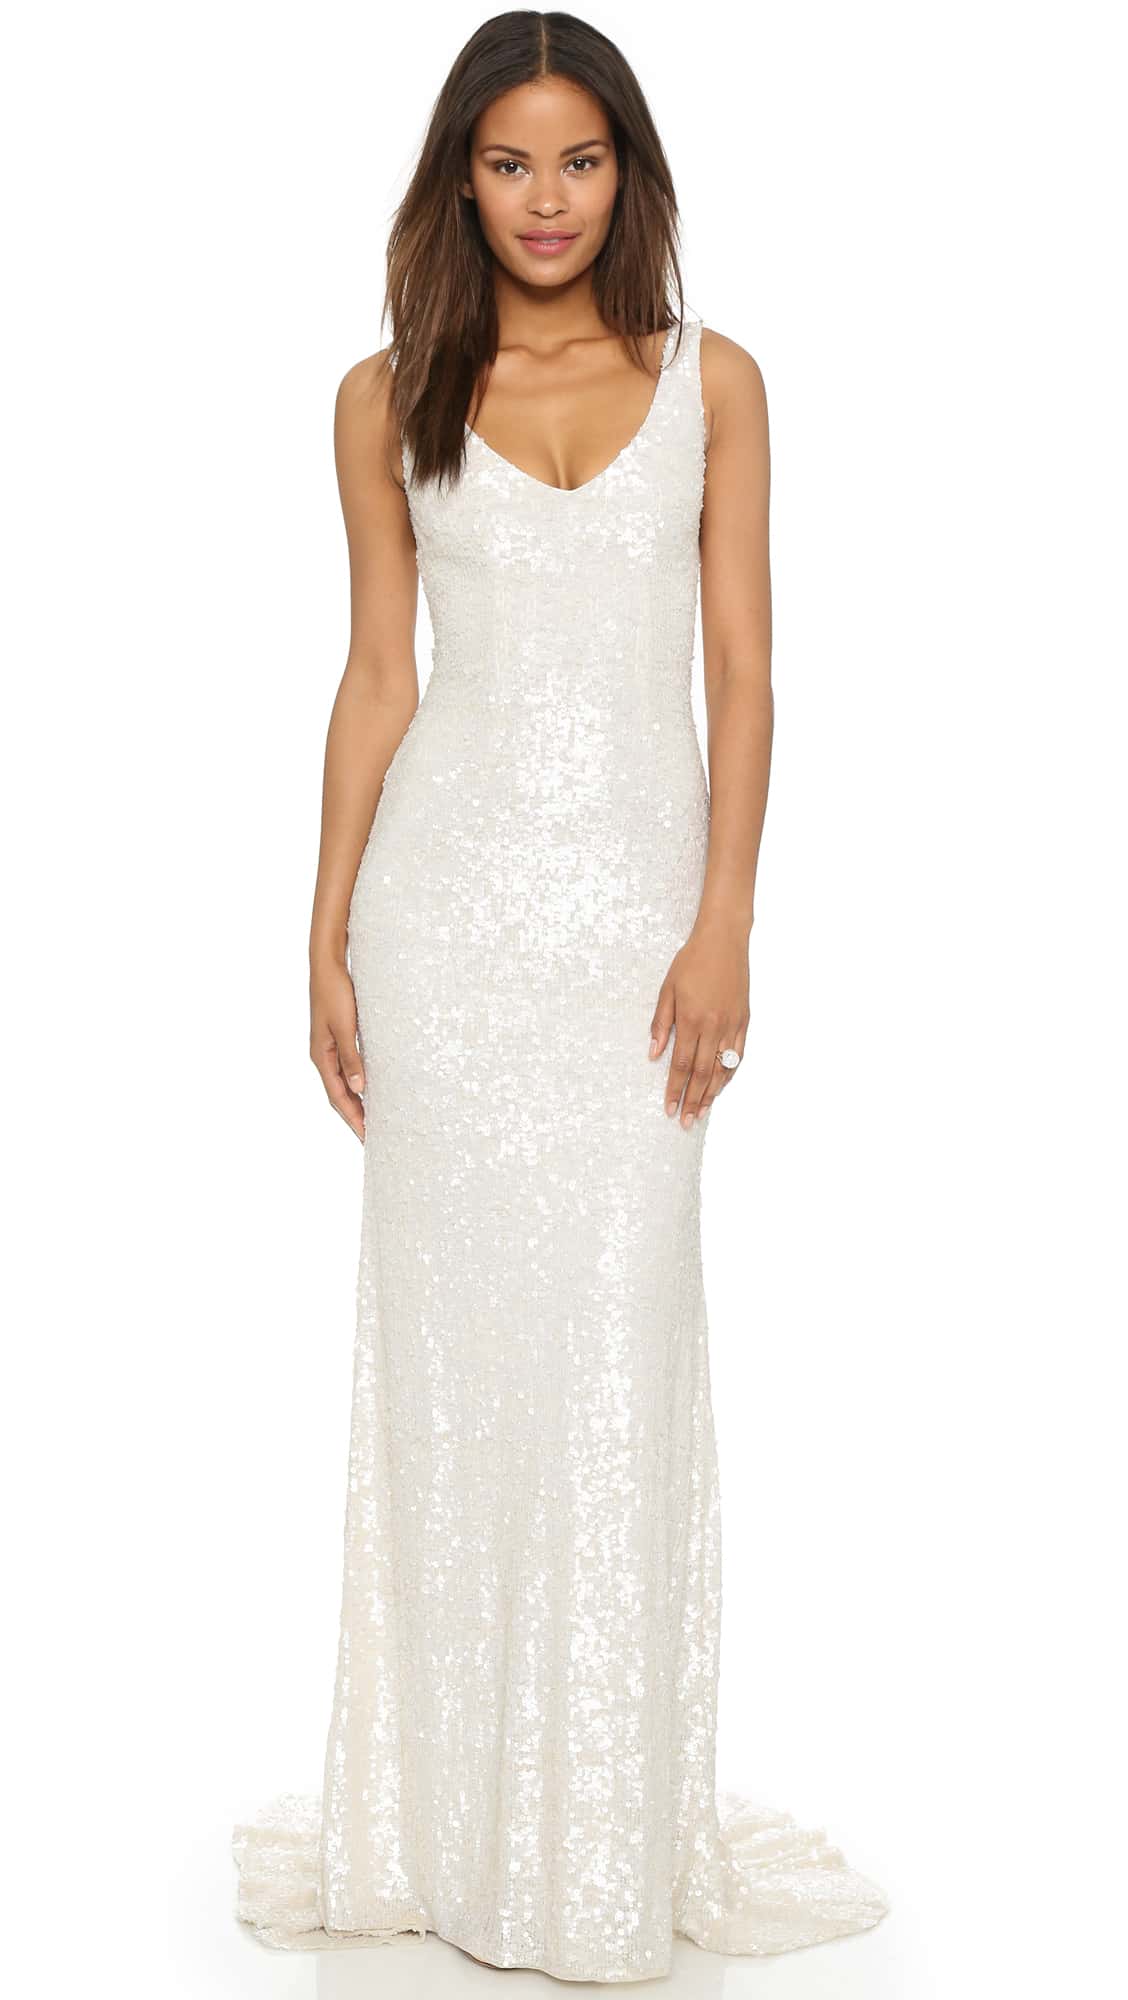 Long White Sequin Gowns For Weddings Vow Renewals Or Engagement